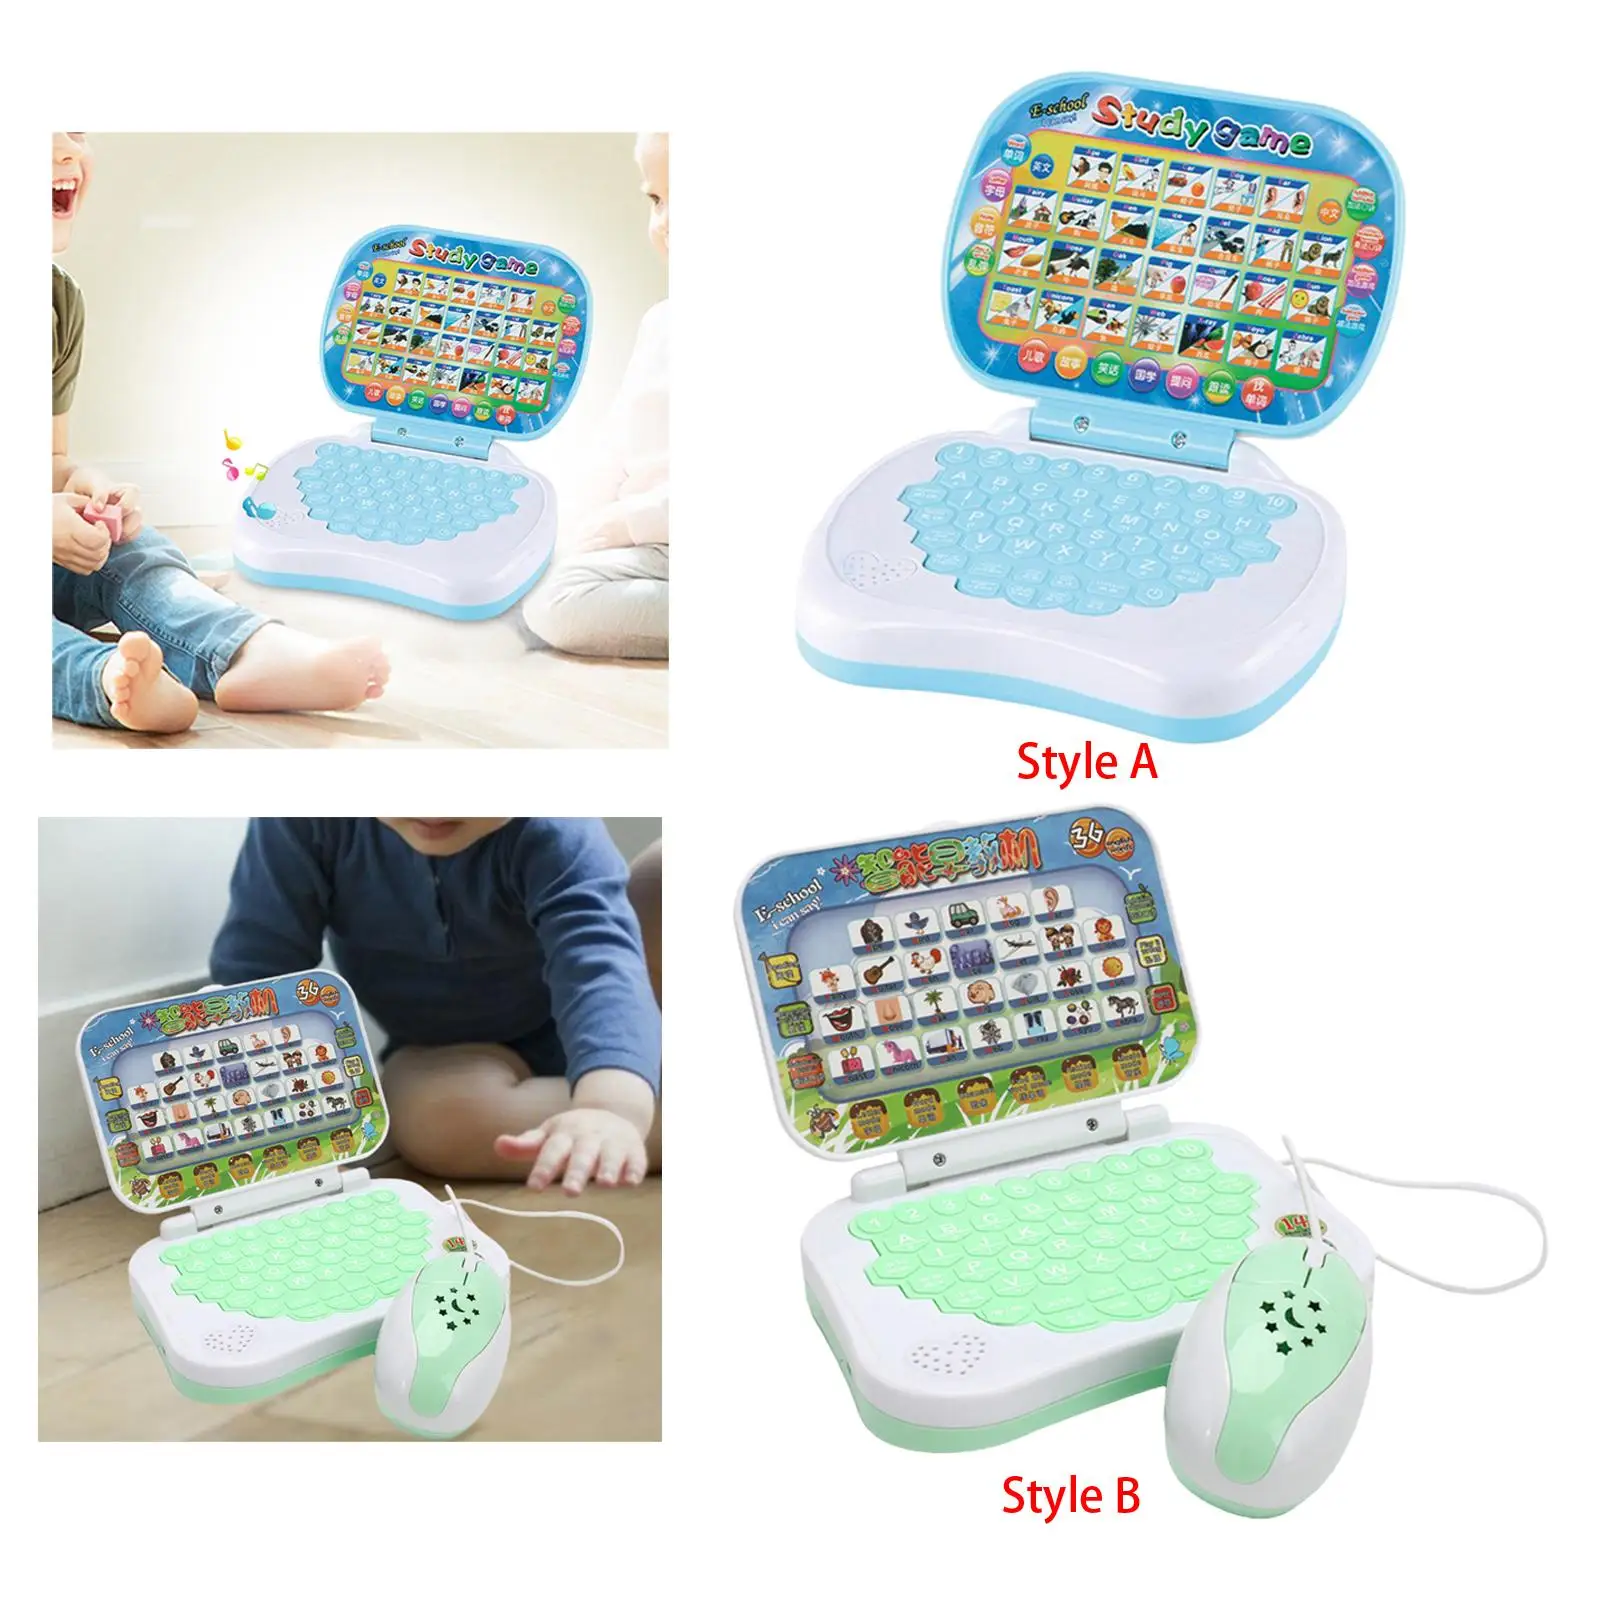 Handheld Language Learning Machine Activities Computer Early Education Kids Laptop Toy for Girls Boys Children Kids